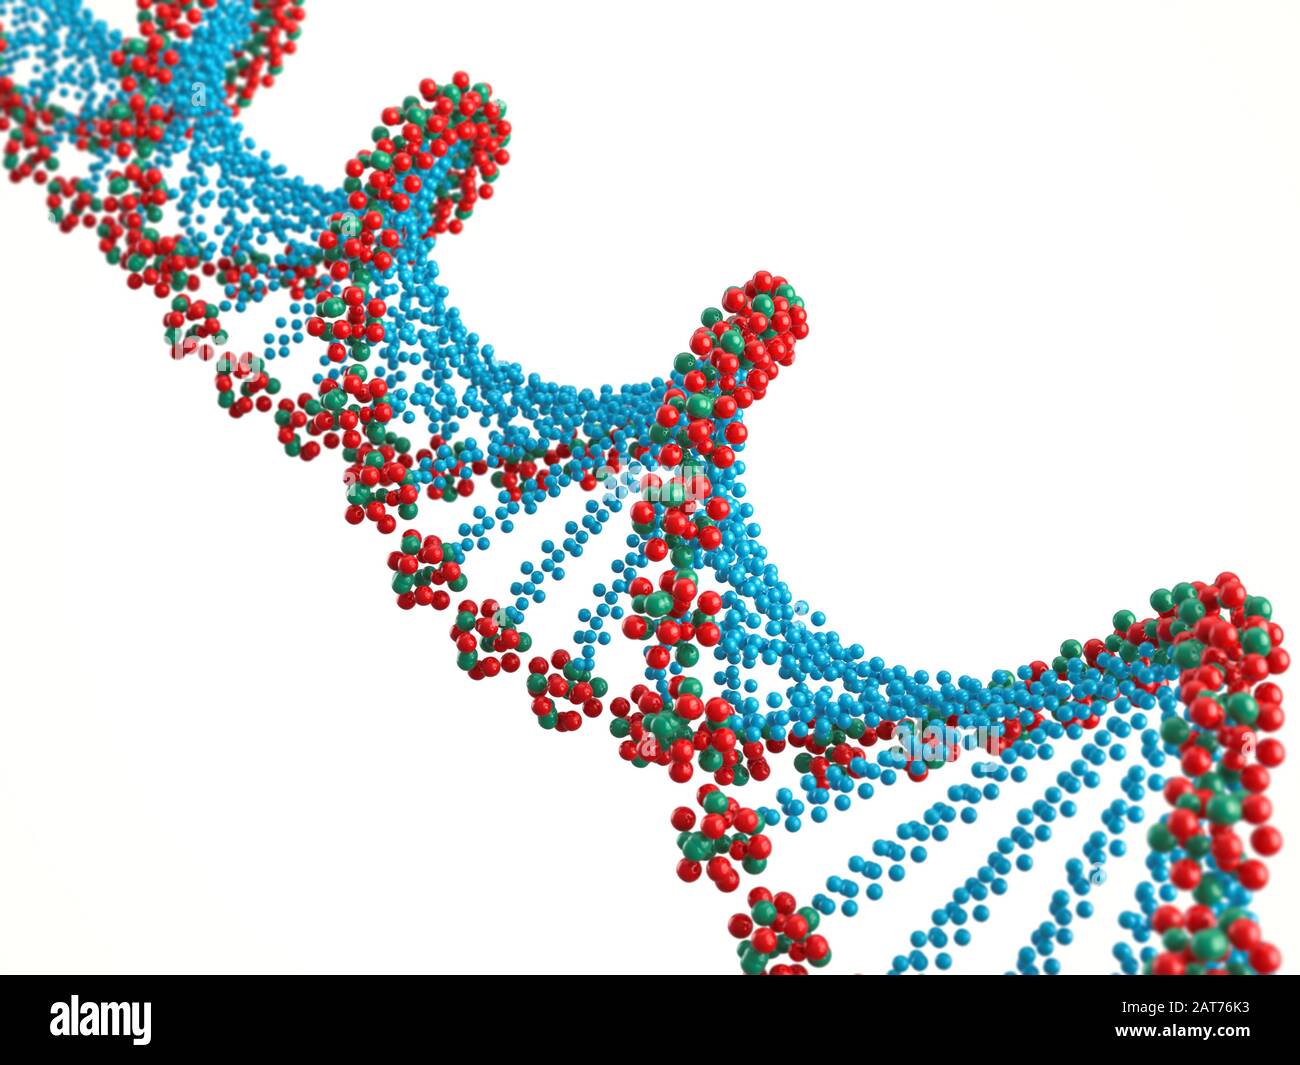 Double helix, DNA, structure illustration isolated on white Stock Photo